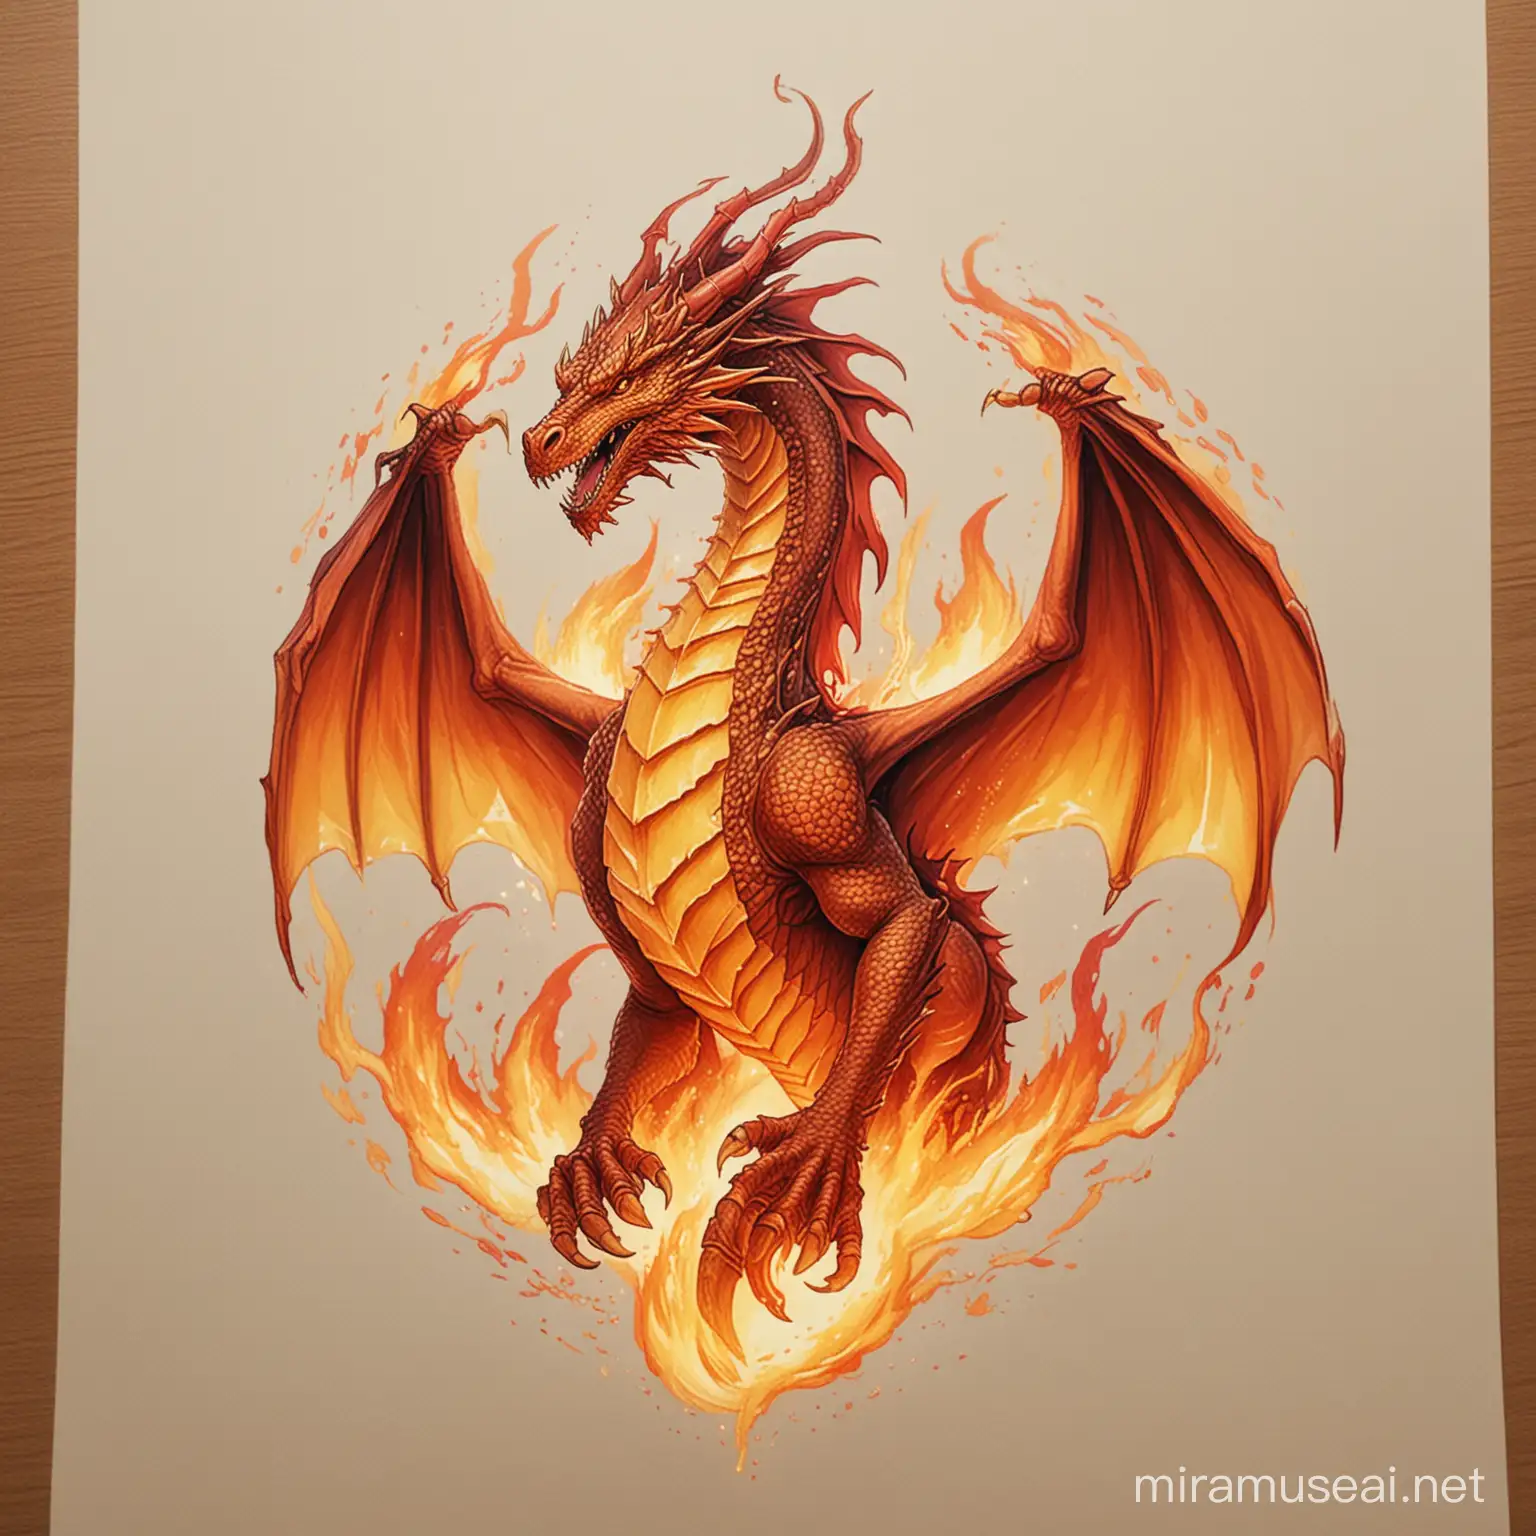 Make a draw of the fire dragon, alquic simbol